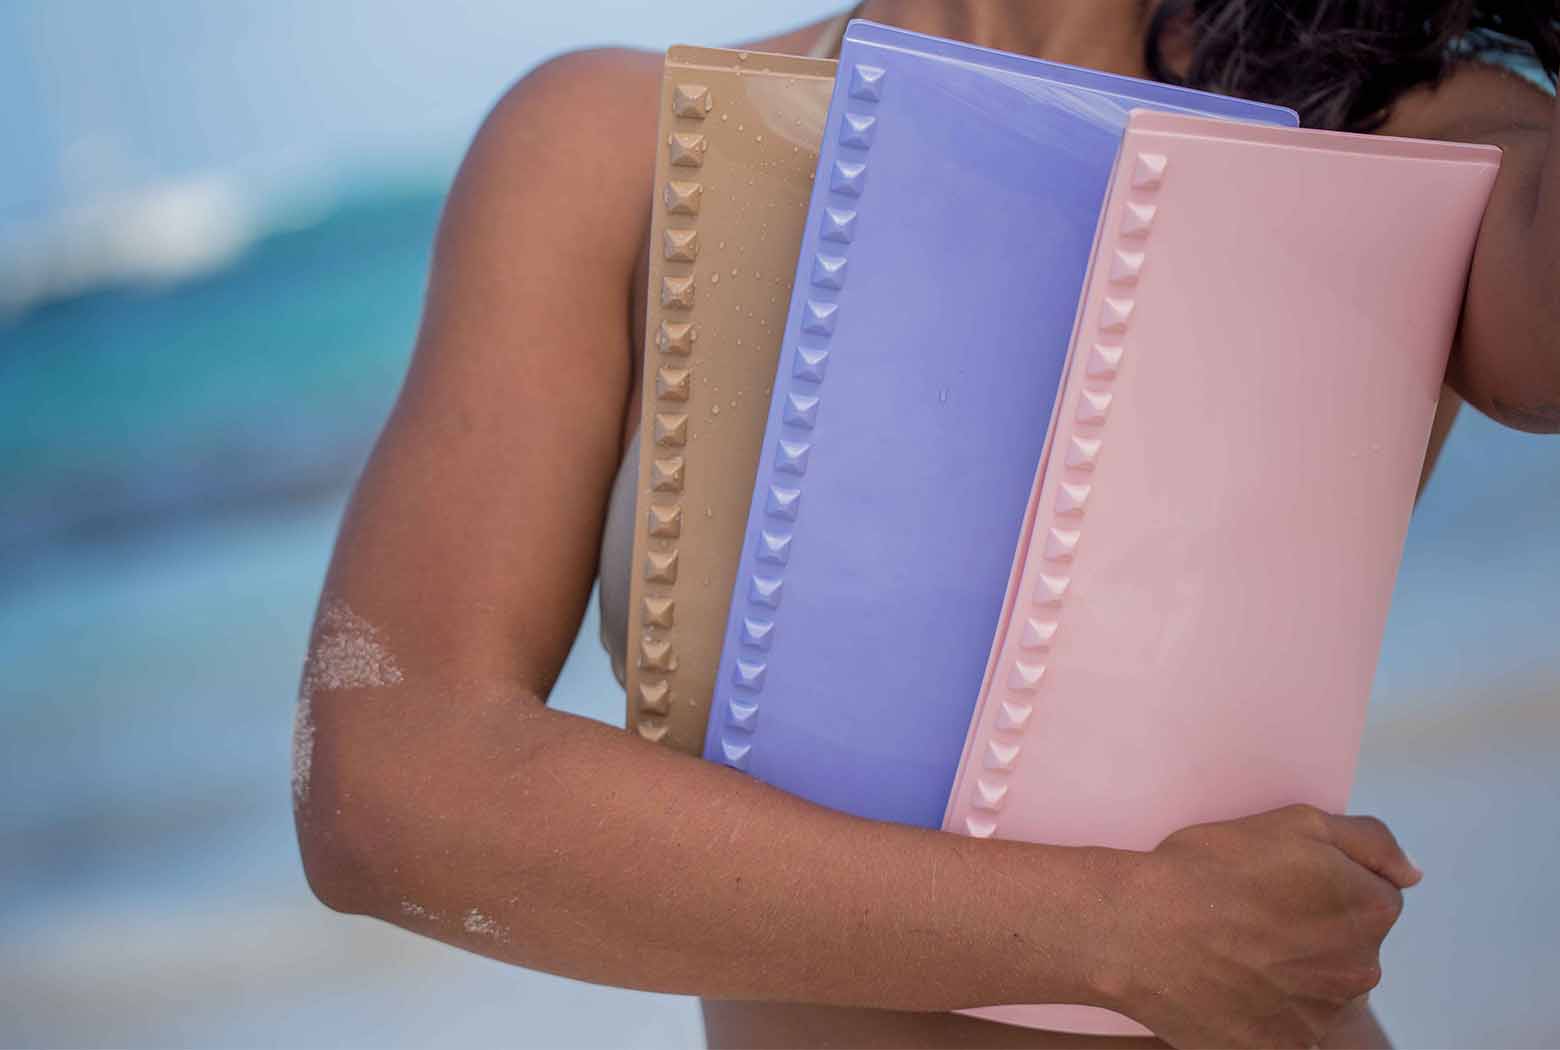 Transparently Chic: Embrace the Jelly Bag Craze and Make a Fashion Statement